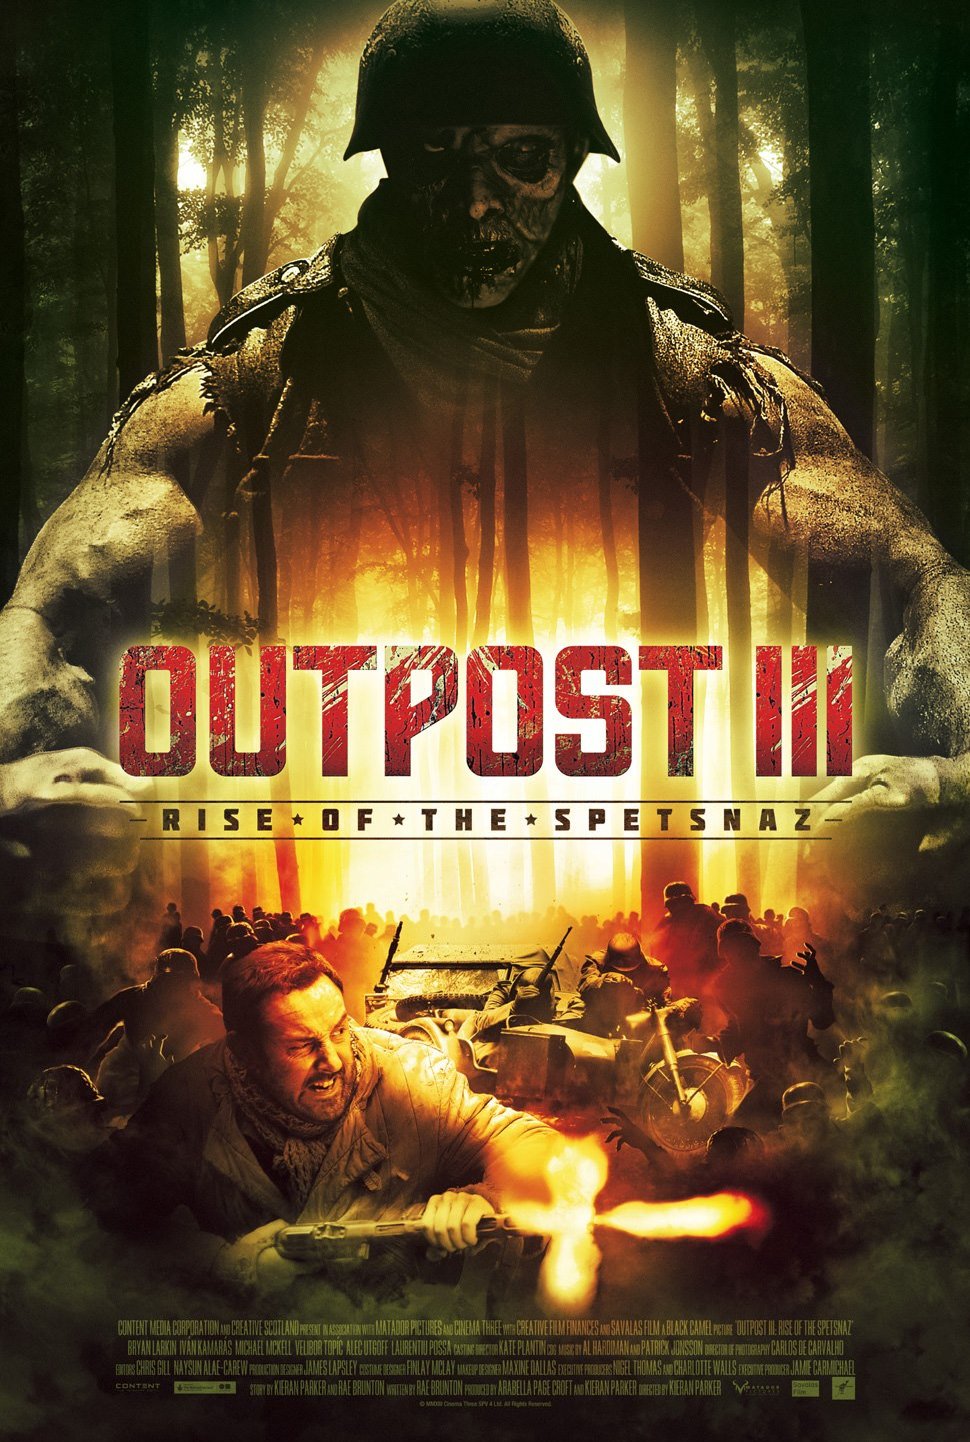 Poster of the movie Outpost III: Rise of the Spetsnaz